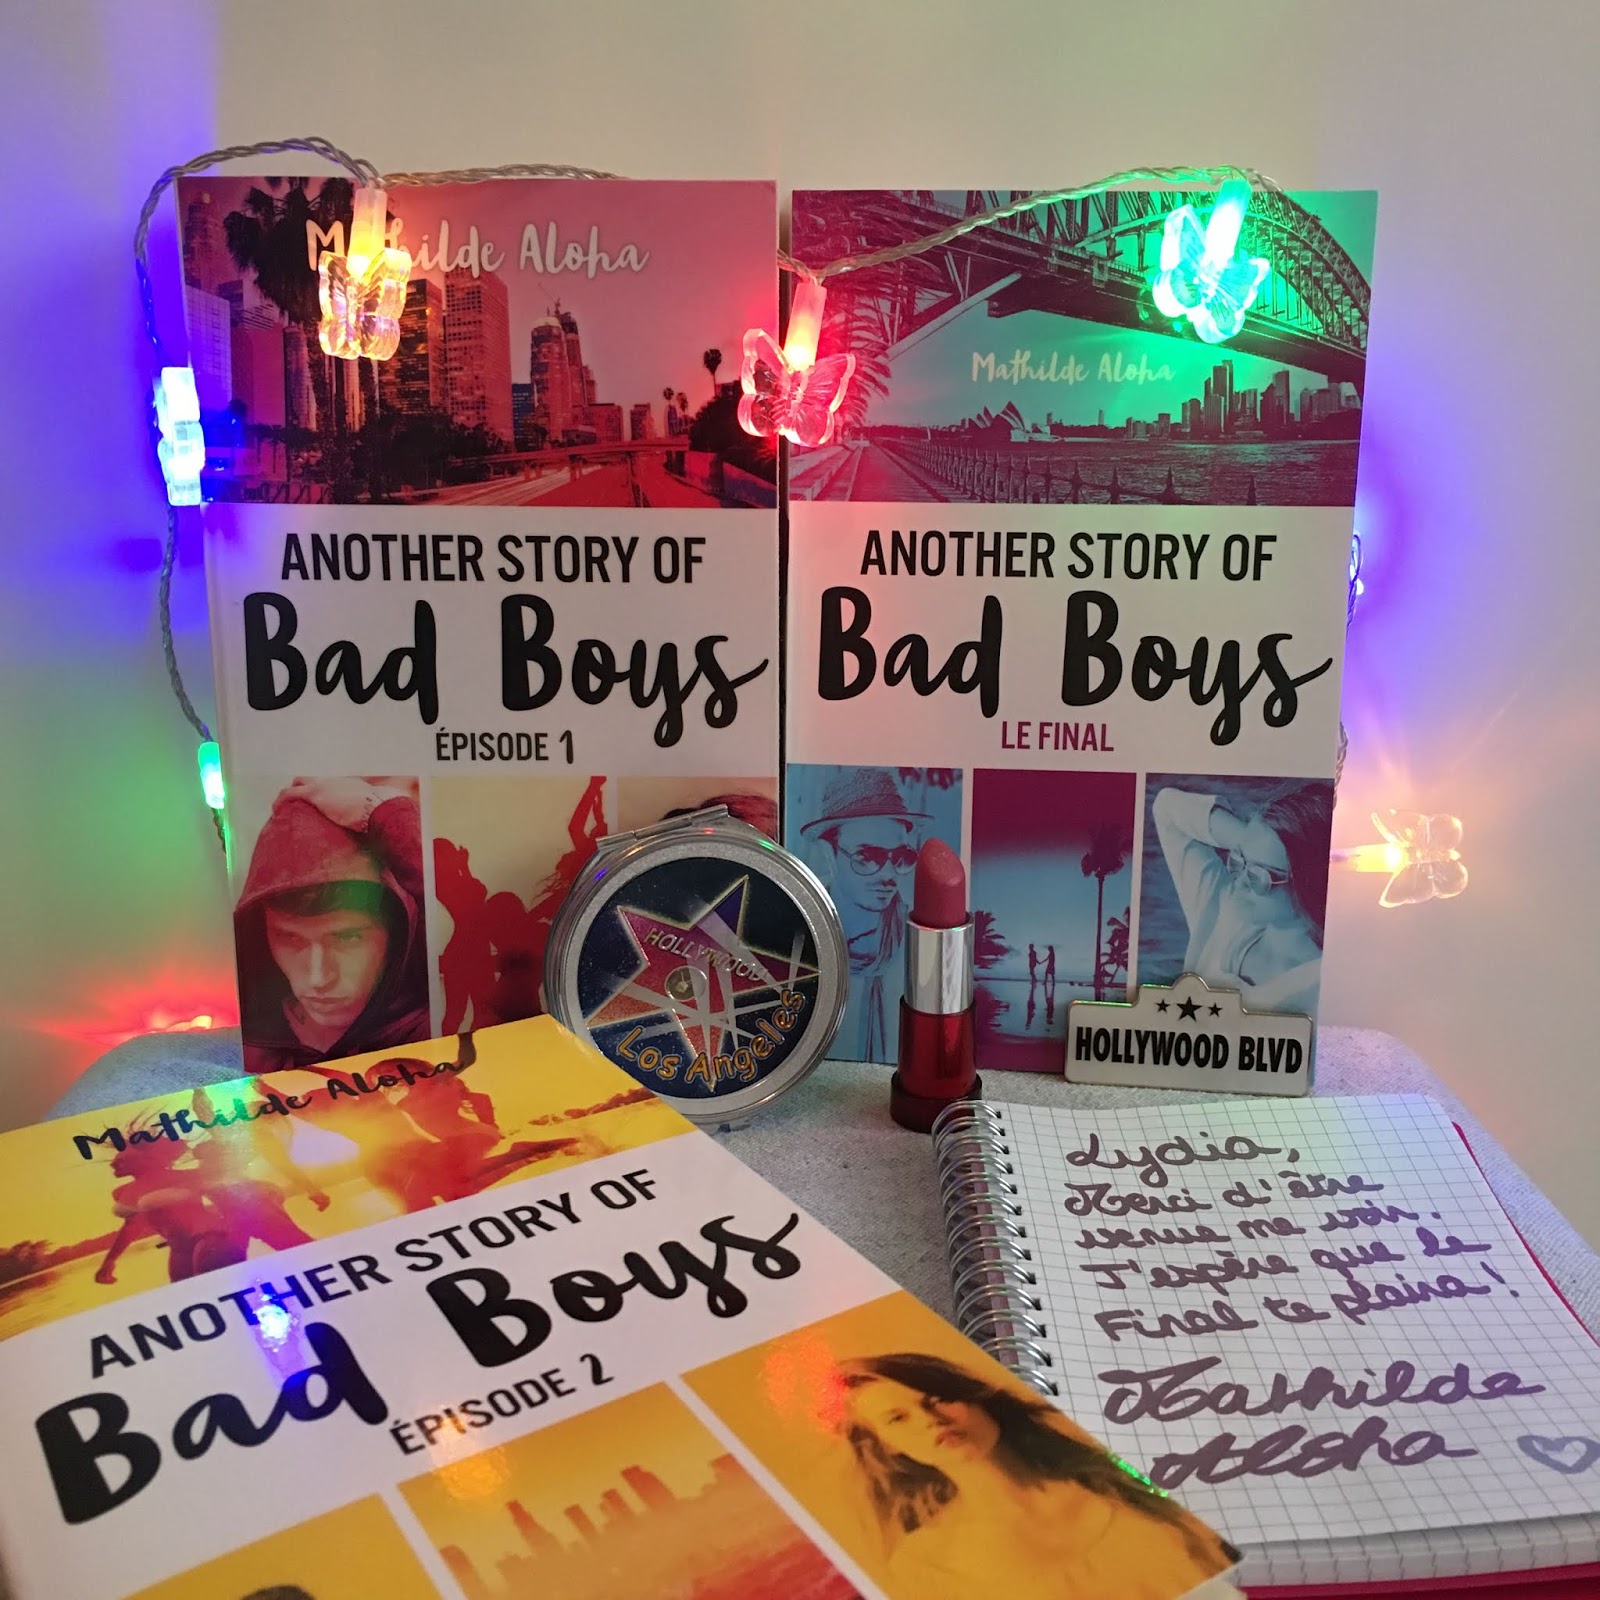 Another Story Of Bad Boy Tome 1 Pdf ANOTHER STORY OF BAD BOYS - MATHILDE ALOHA